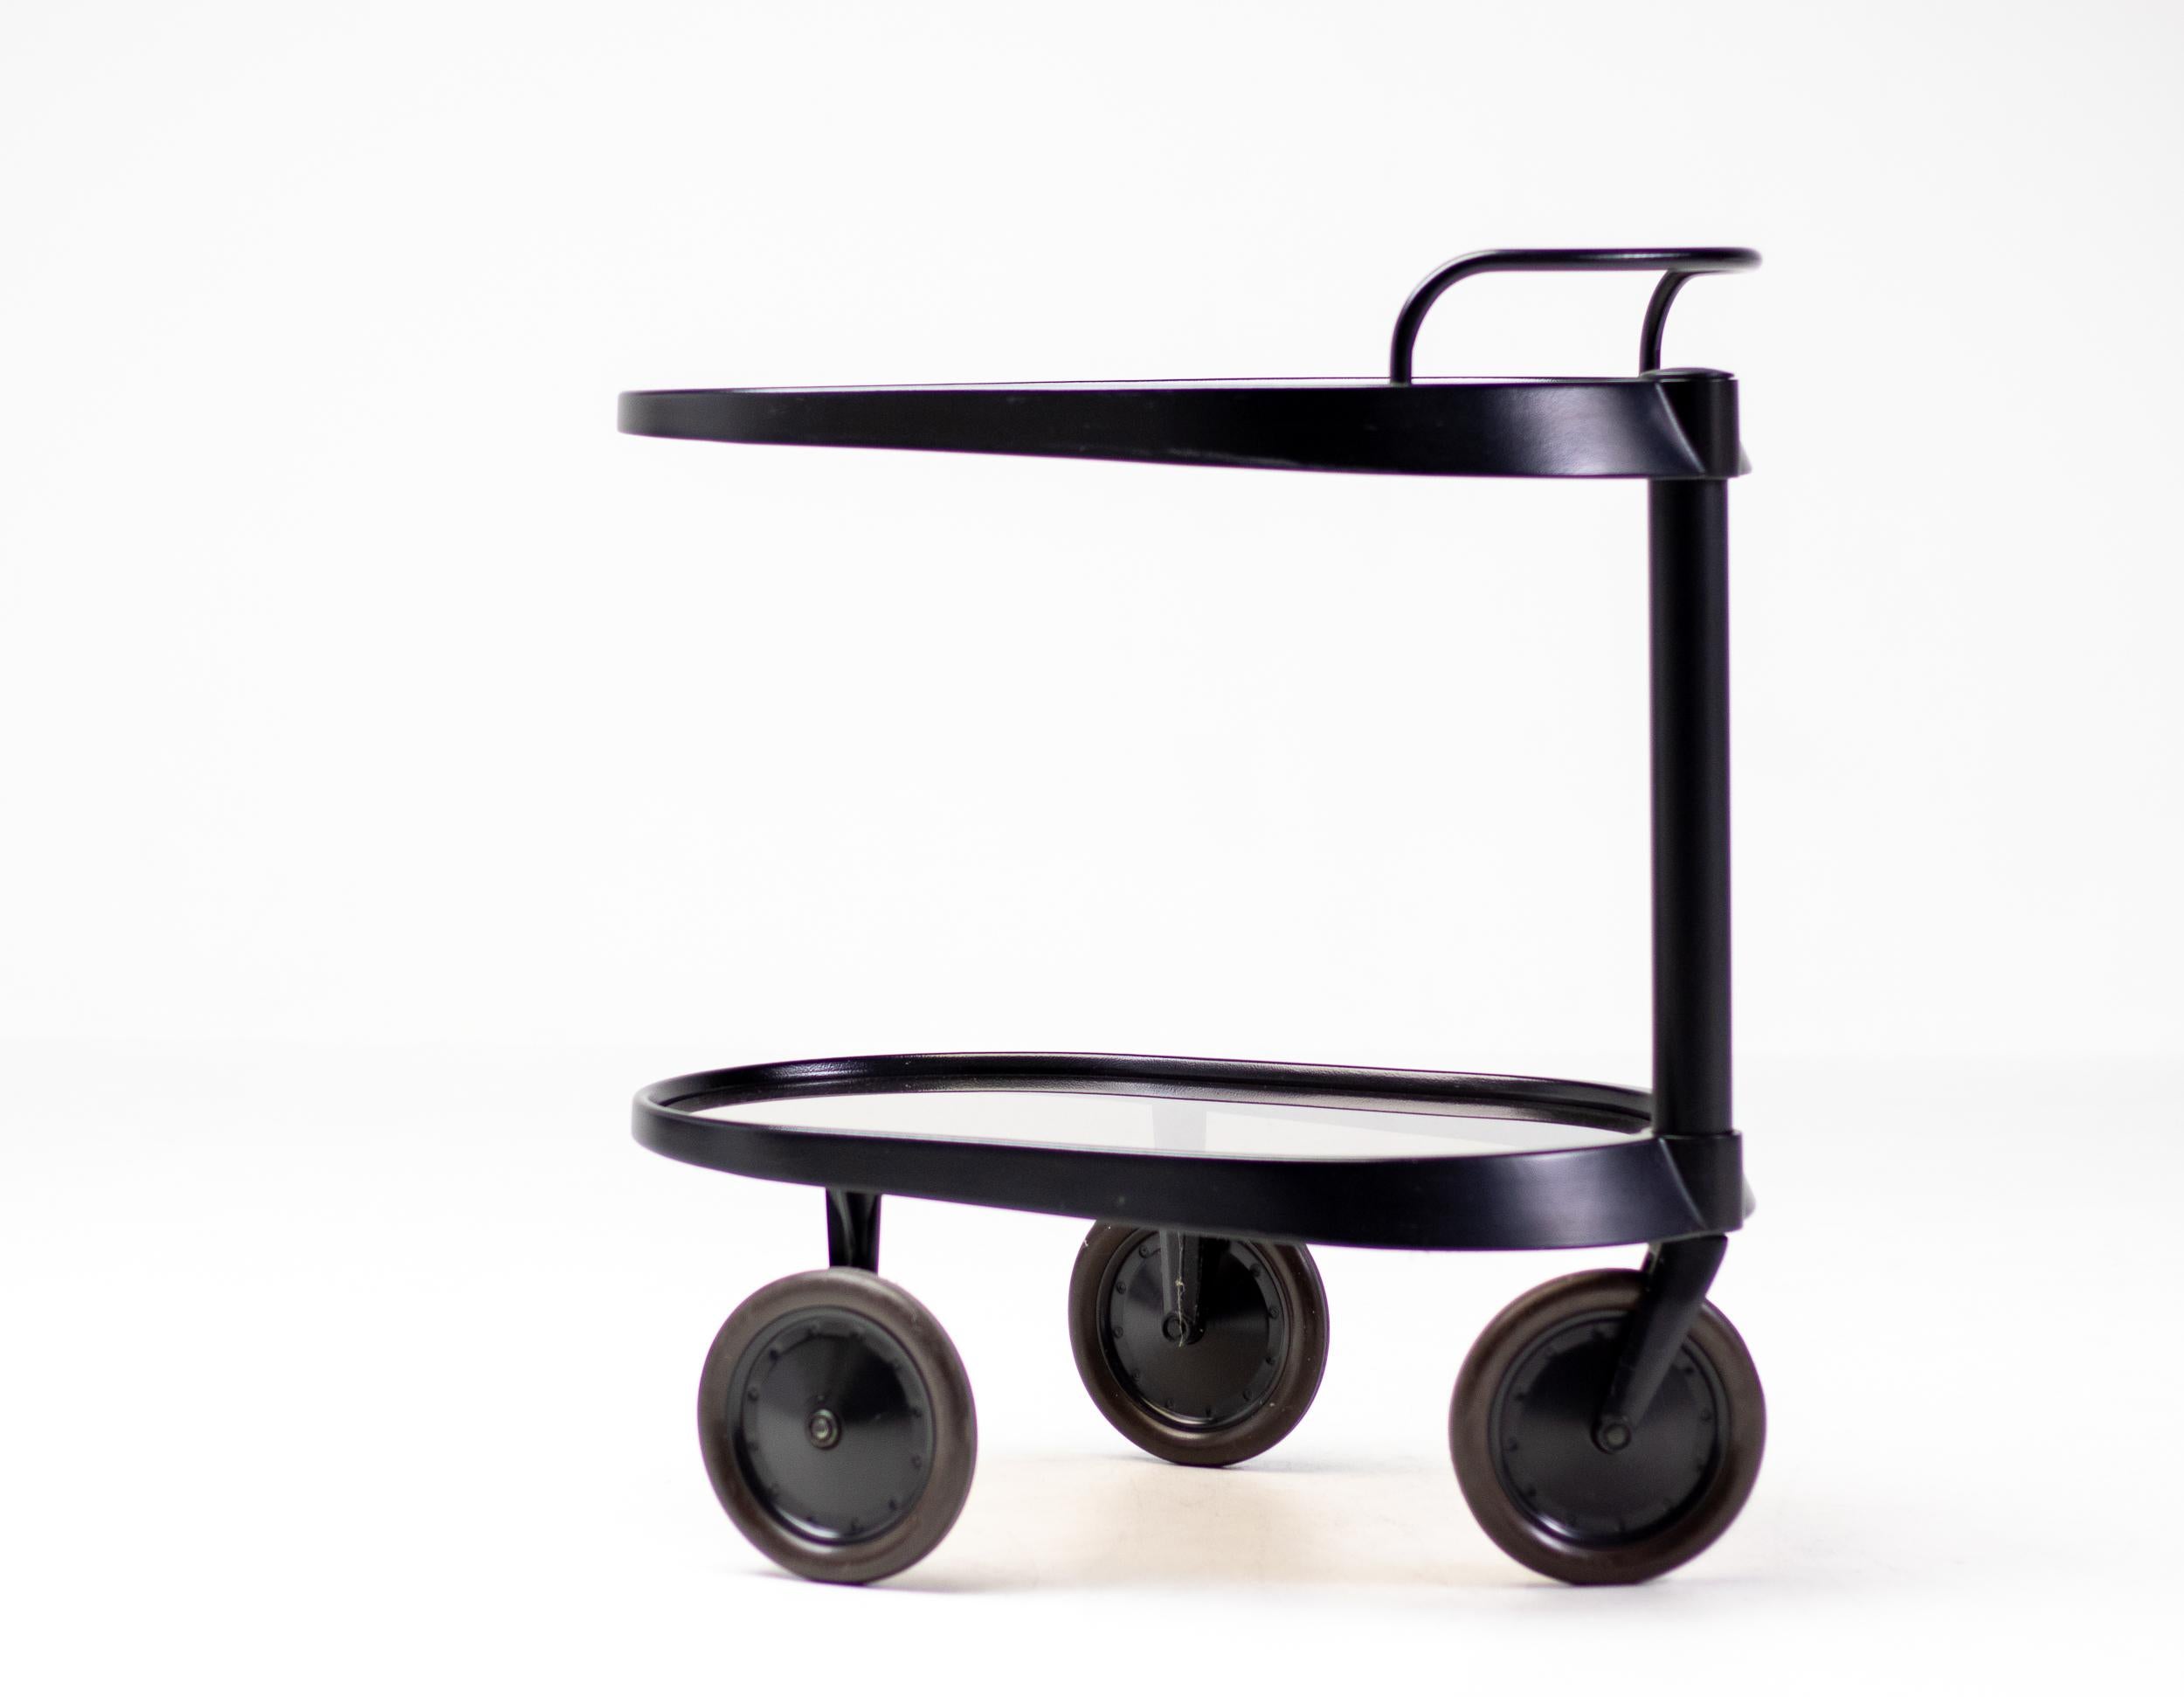 Aluminum Serving Trolley by Enzo Mari for Alessi